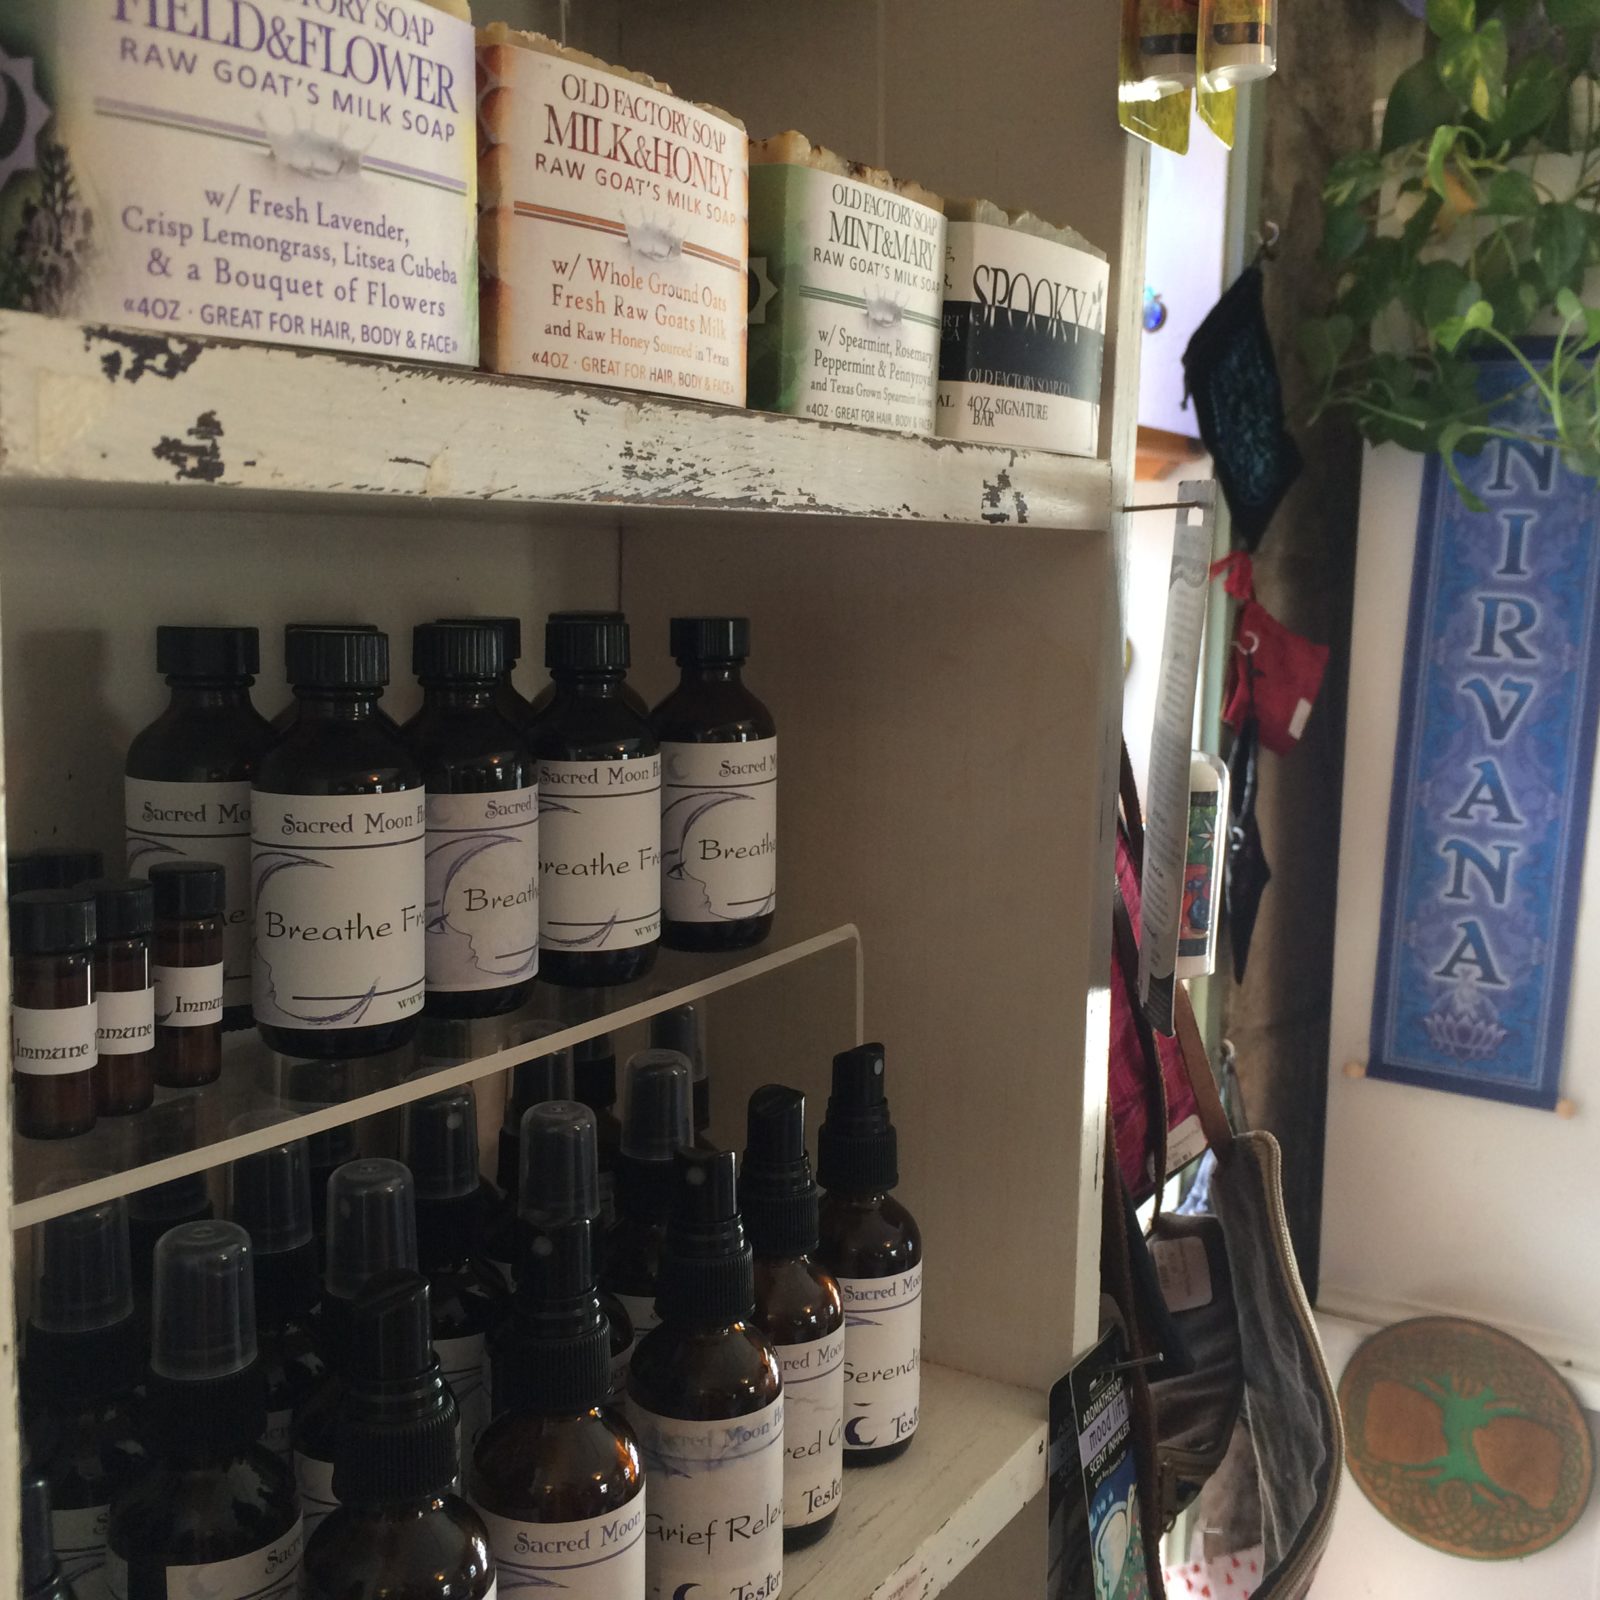 Sacred Moon Herbs Aromatherapy Sprays and Old Factory